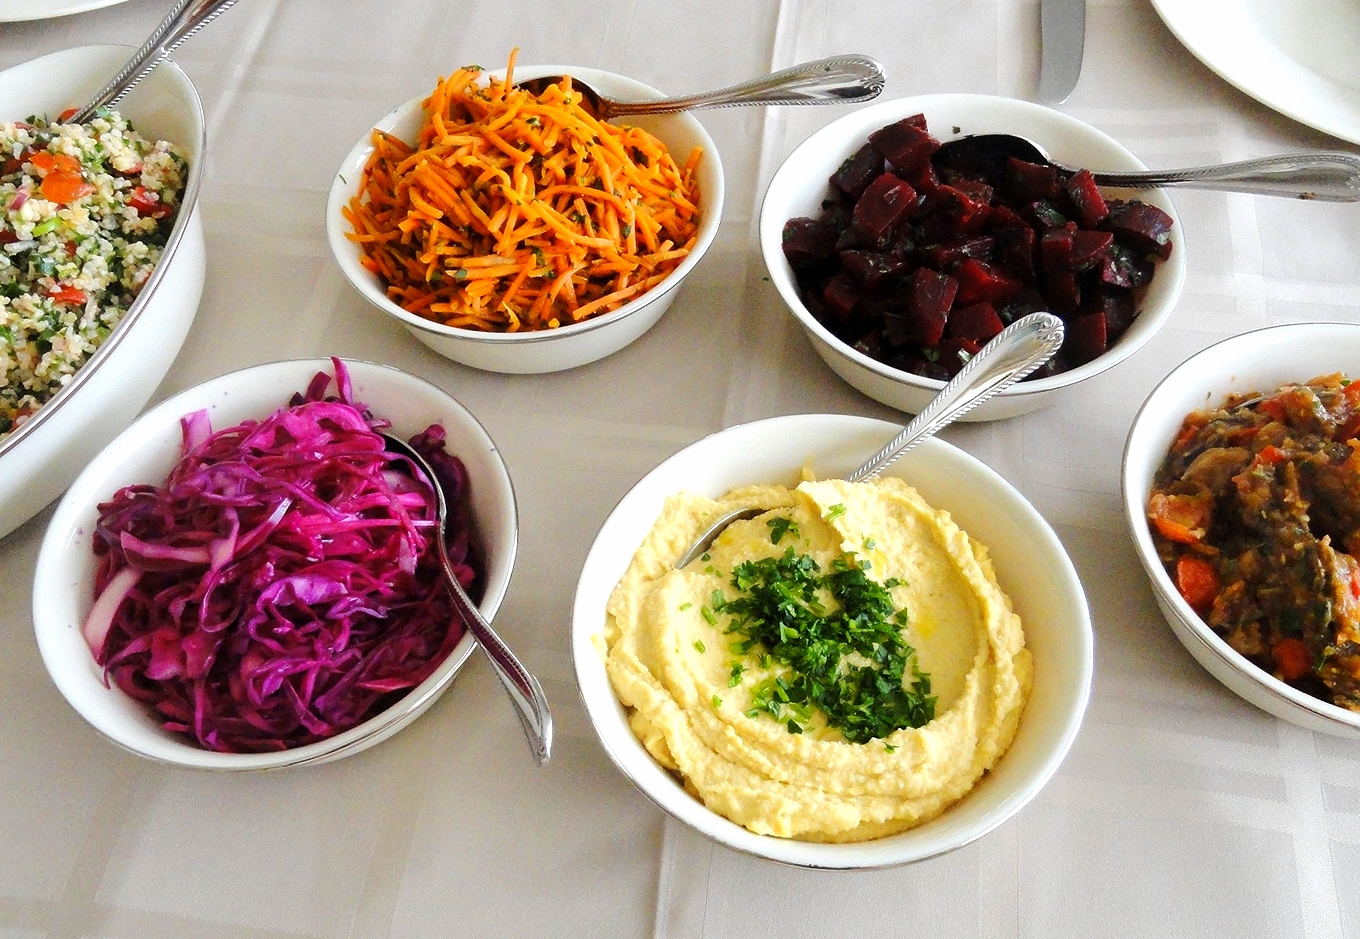 Israeli salads: vegetable Israeli couscous, red cabbage, carrot-cumin, hummus, Moroccan spiced beets, roasted eggplant and tomato with za'atar